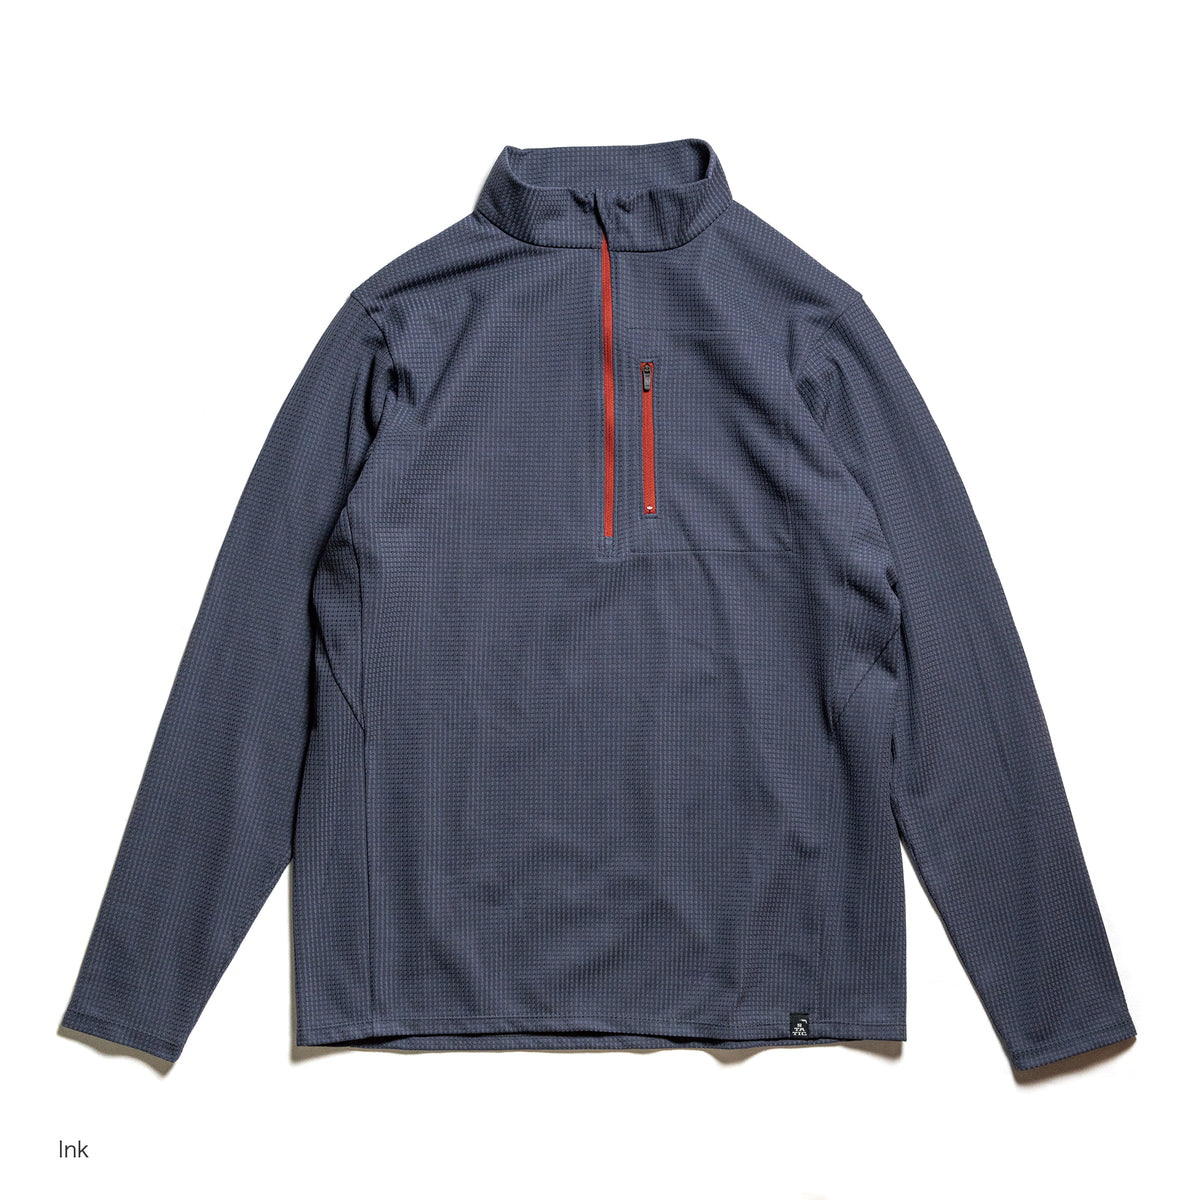 DOUBLECELL ZIP NECK L/S SHIRTS